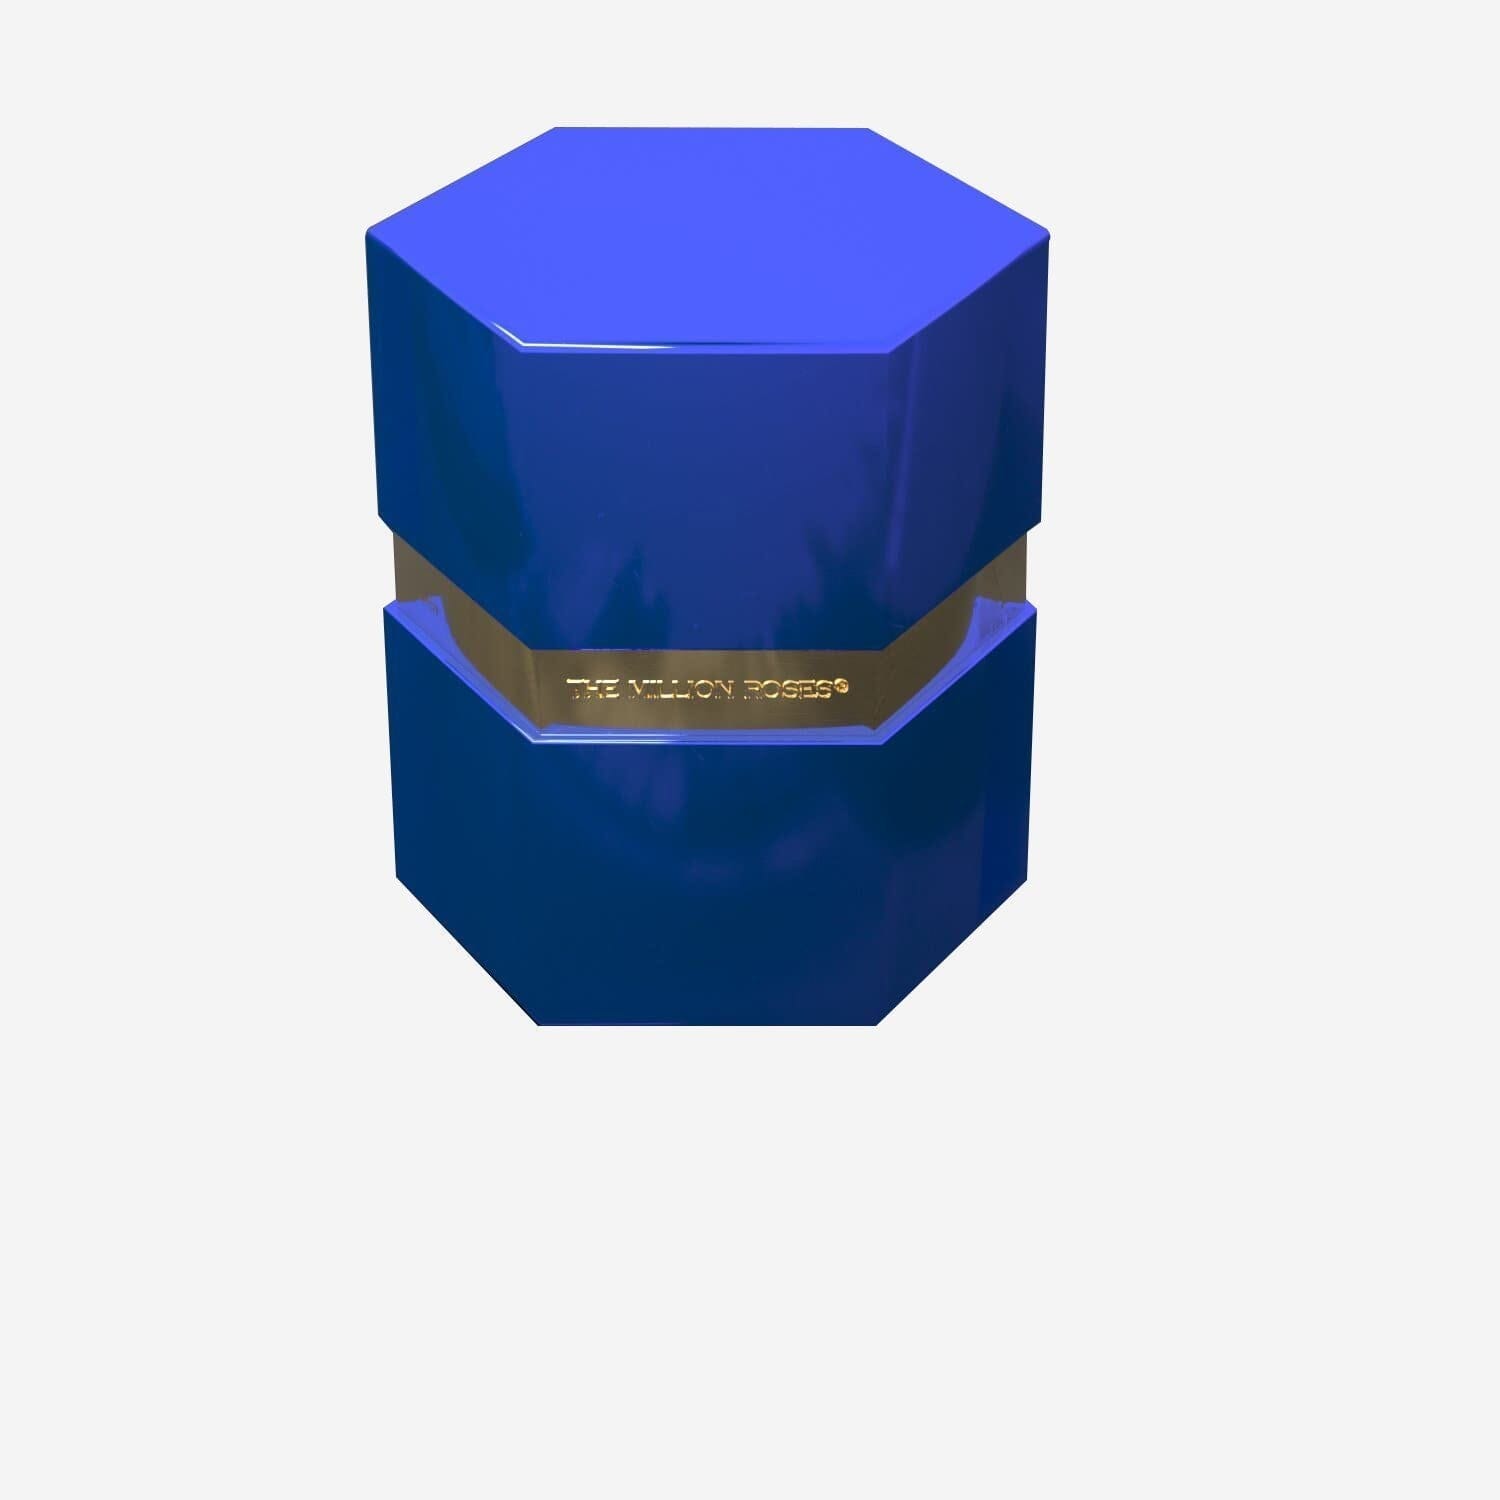 One in a Million™ Mirror Blue Hexagon Box | Peach & Gold Roses - The Million Roses